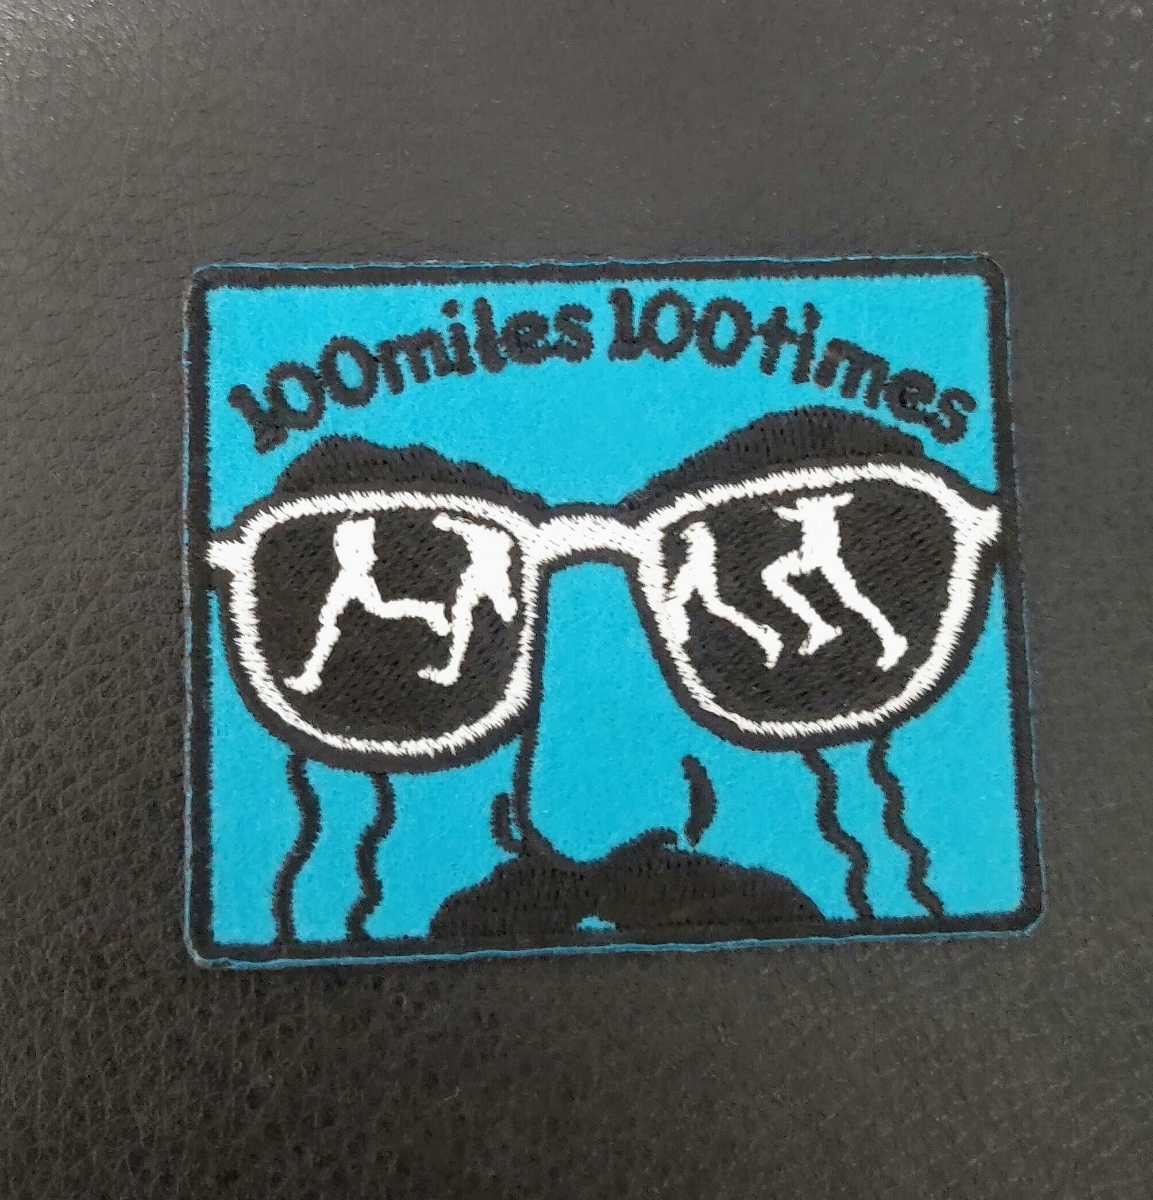 100miles100times Patch ワッペン 完売品 ジェリー鵜飼